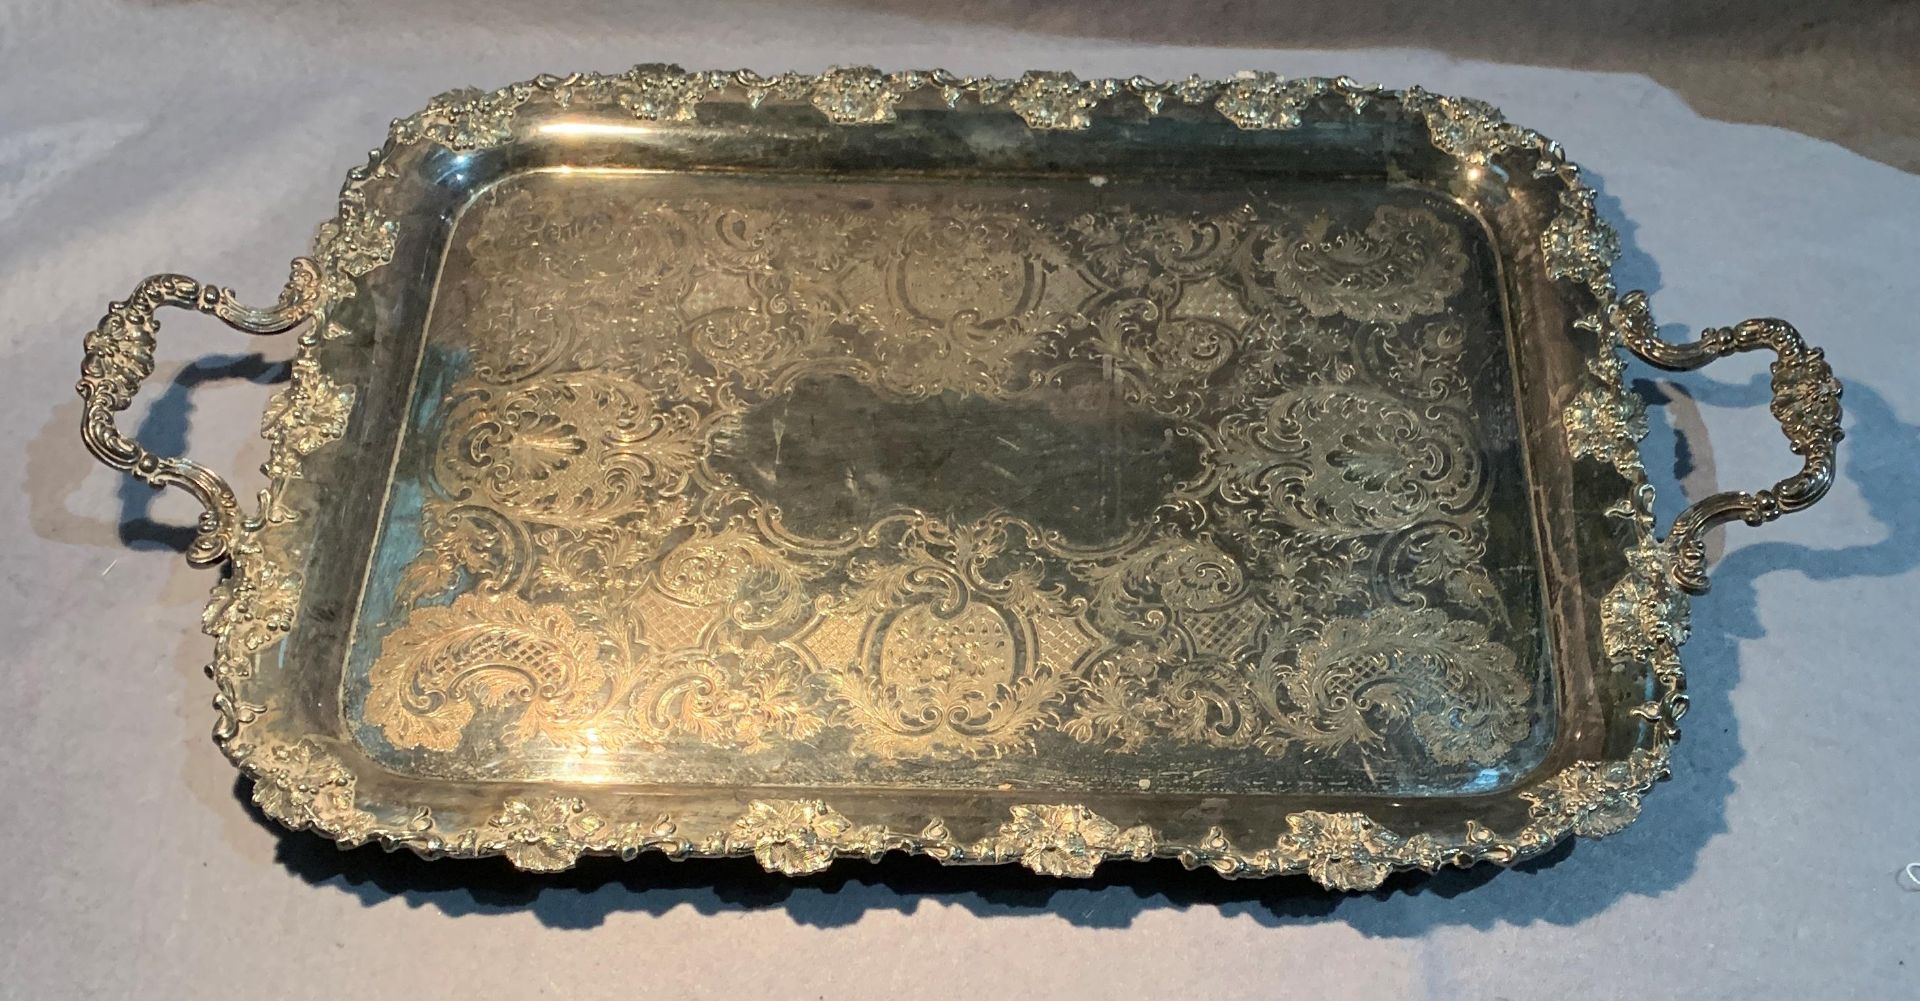 An engraved and decorated two handled silver plated tray,